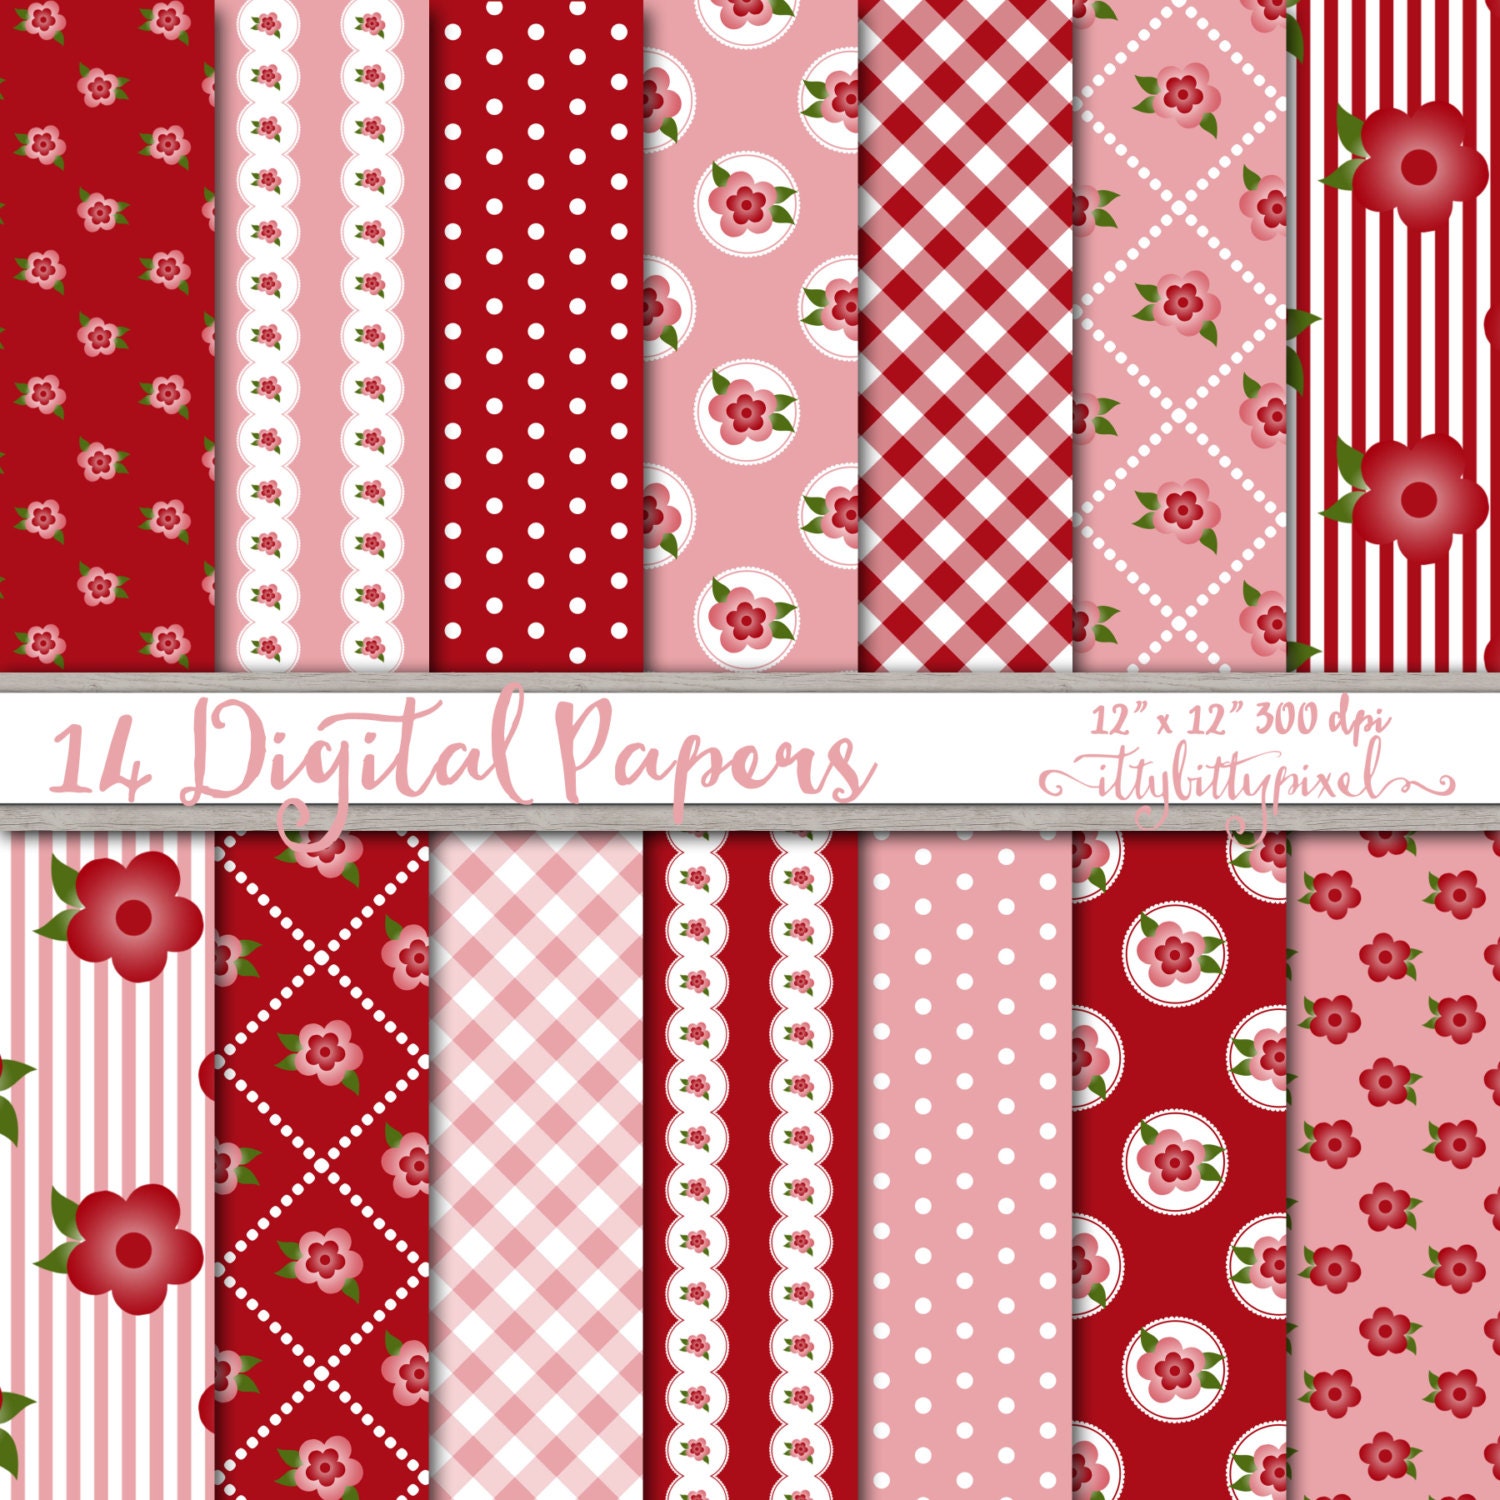 Download Red Pink Shabby Chic Scrapbook Paper Digital Shabby Chic ...